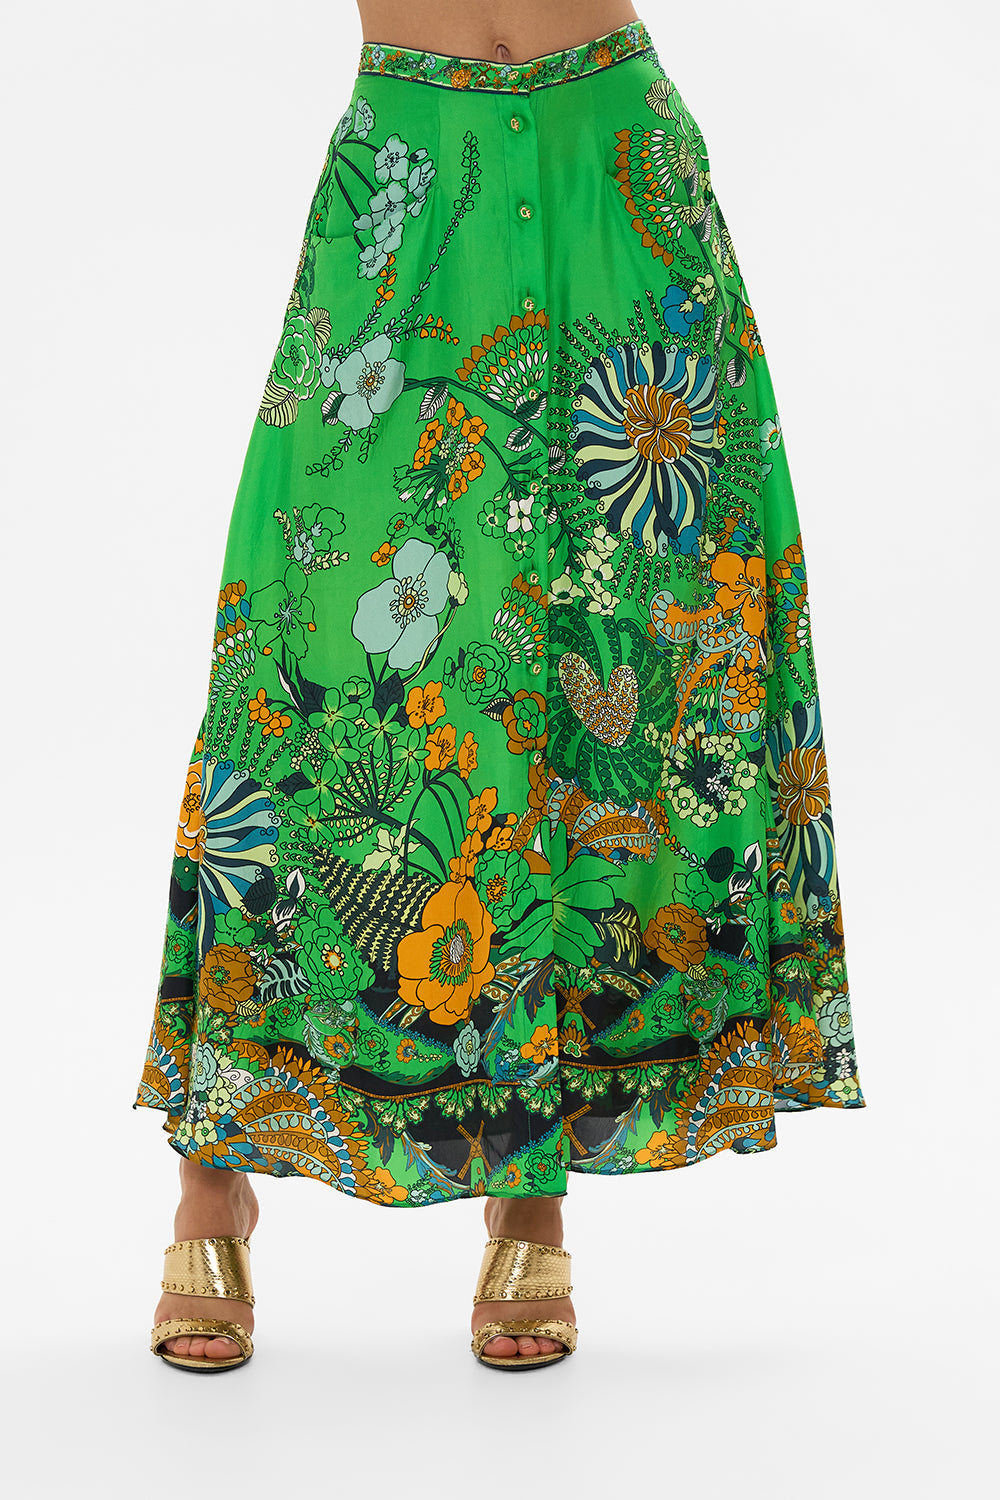 CAMILLA green button through skirt in Good Vibes Generation print.